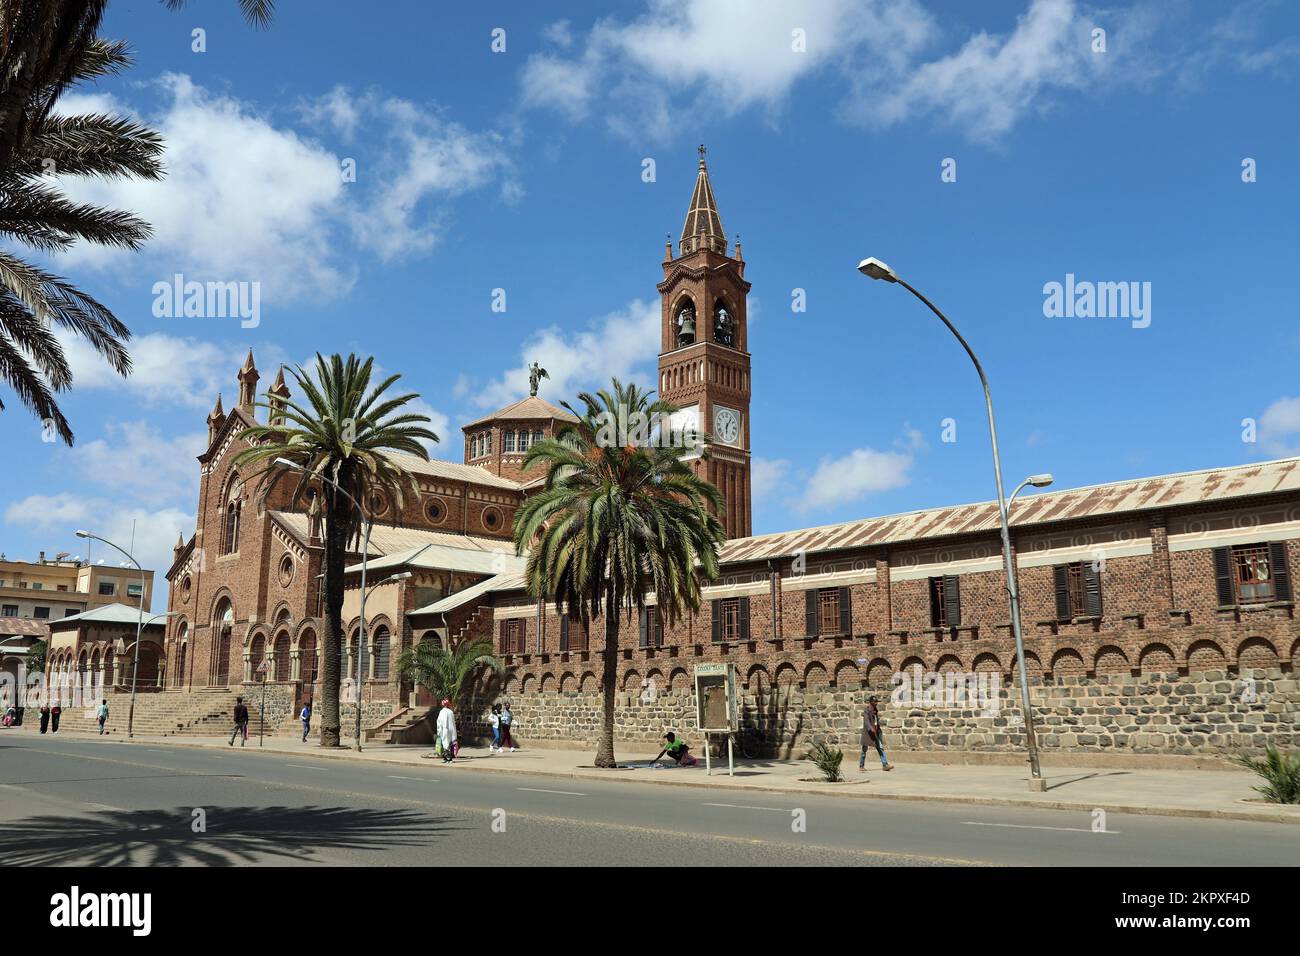 Church of Our Lady of the Rosary built by the Italians in the 1920s in Asmara Stock Photo